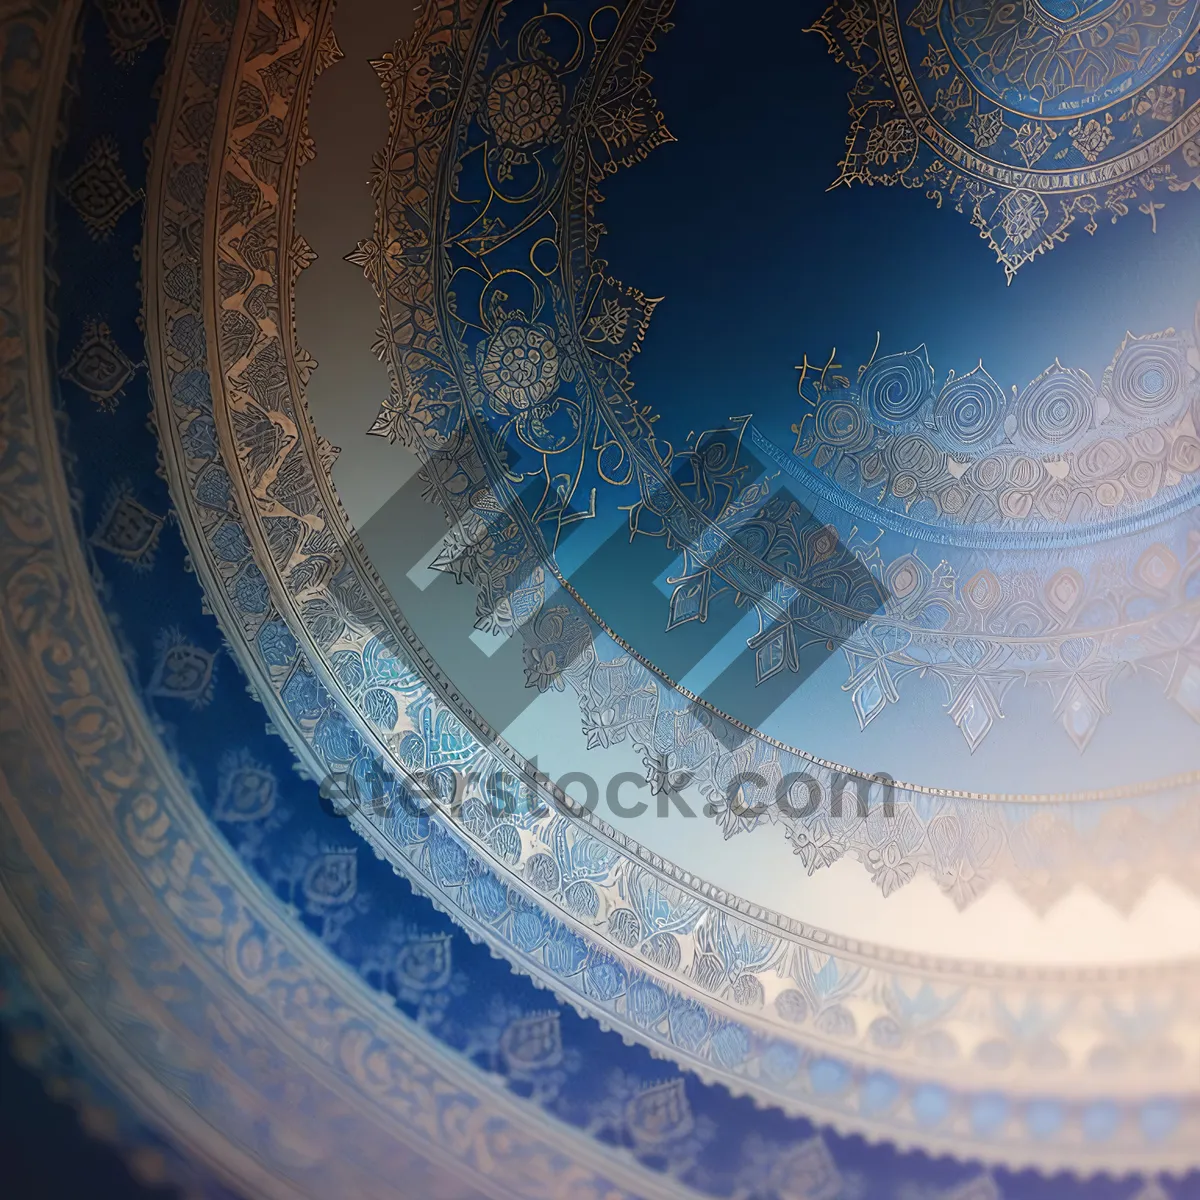 Picture of Chinese Ceramic Art with Fractal Pattern: Textured Utensil Design